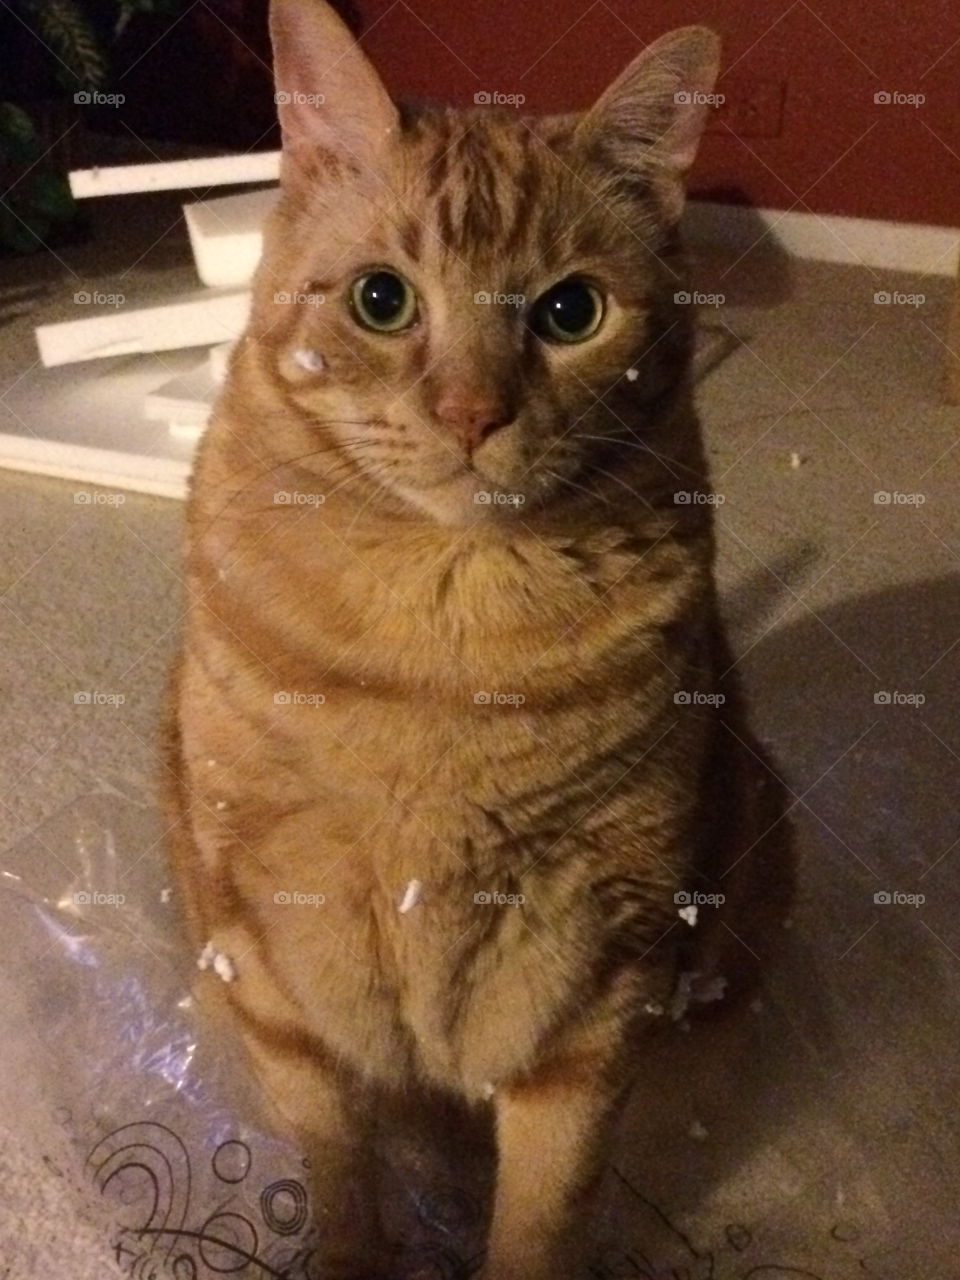 Orange tabby cat after playing in some styrofoam packaging 